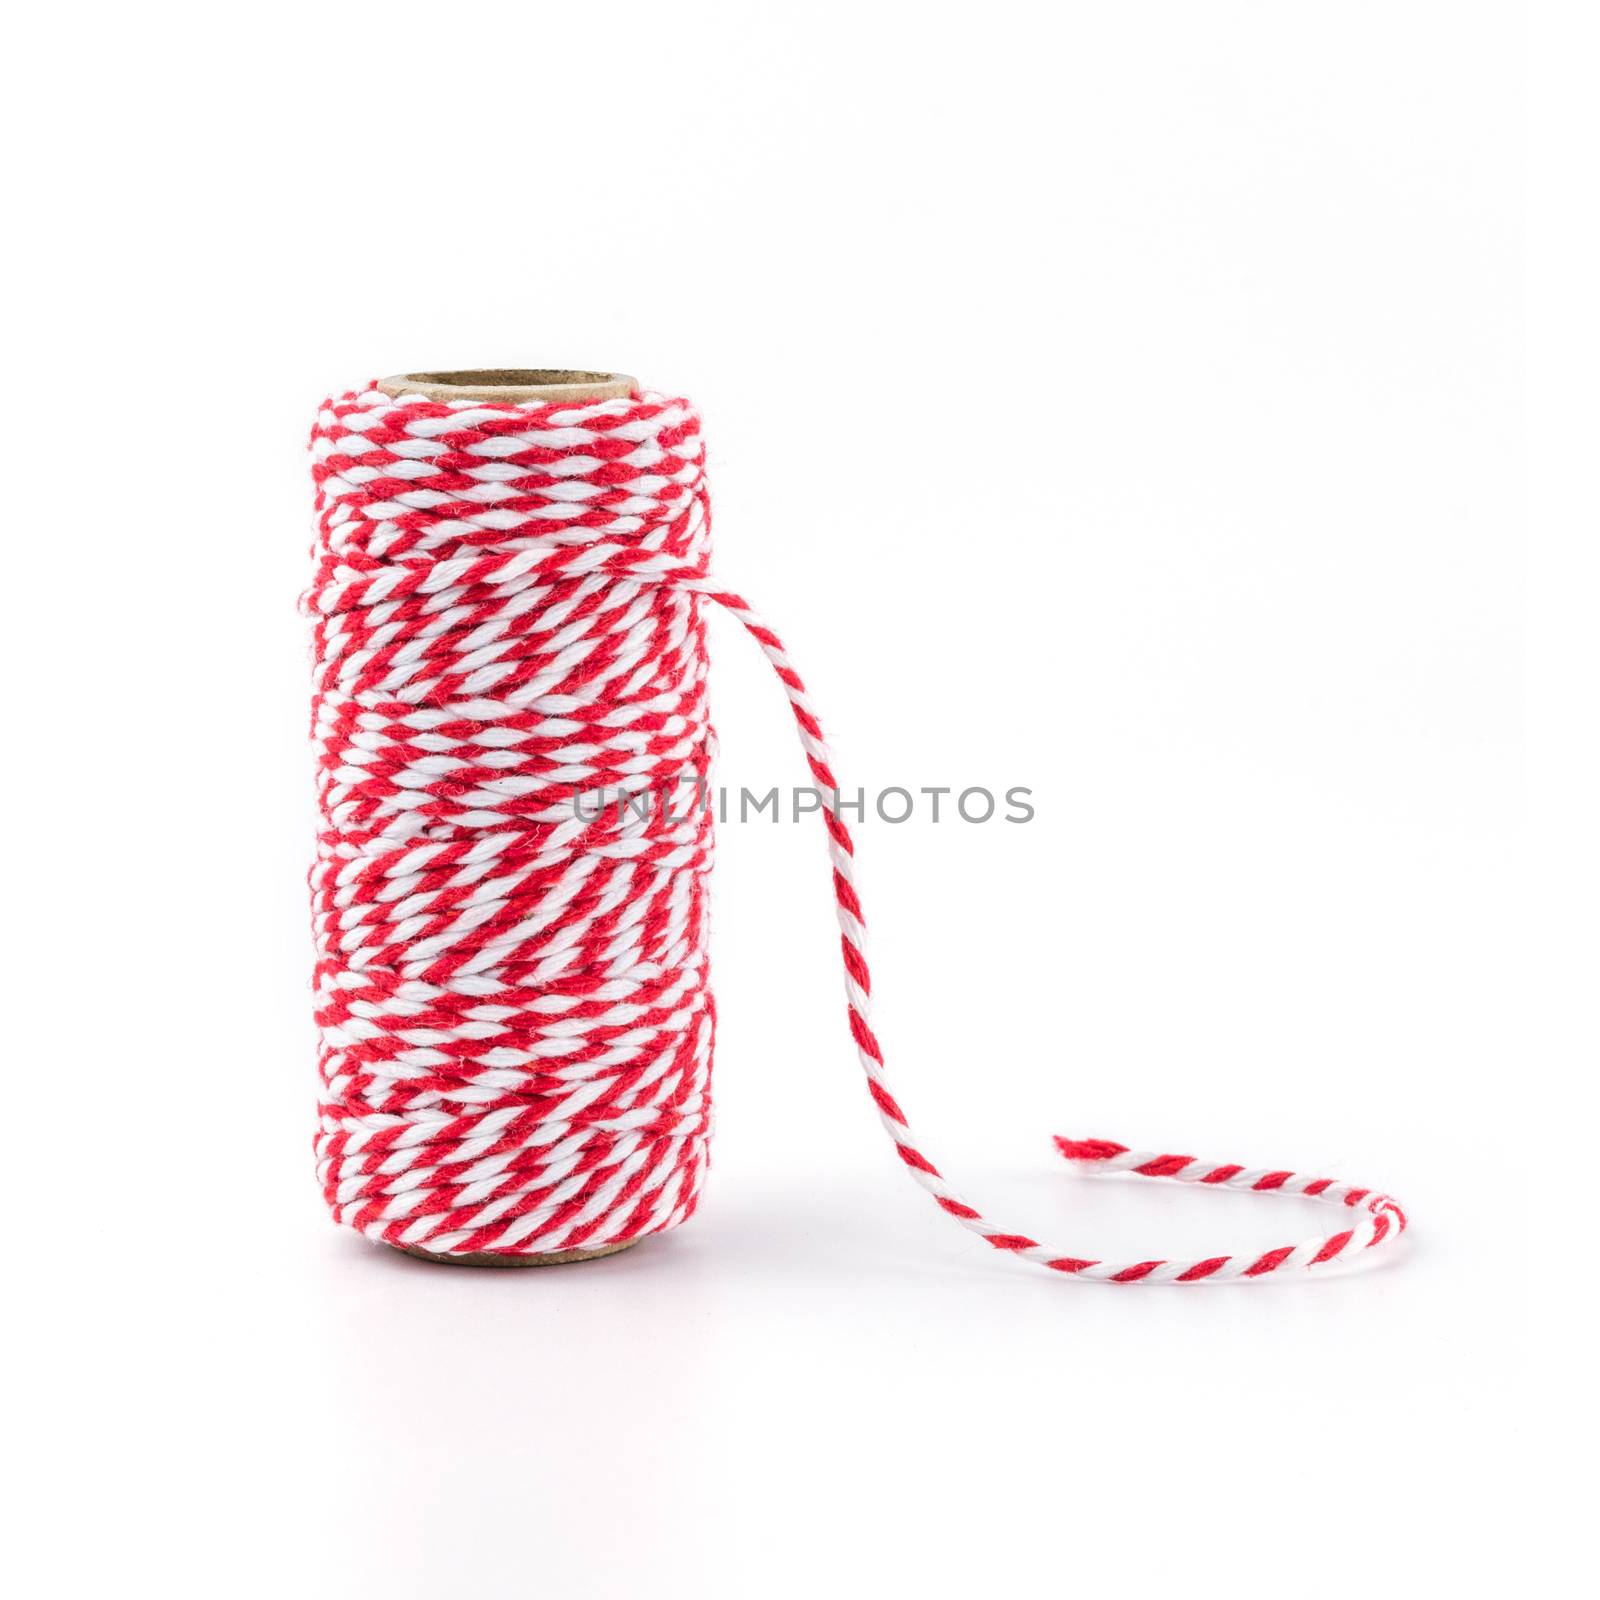 Red and white rope isolated on white background, tied tie multipurpose items seized or sticky material.